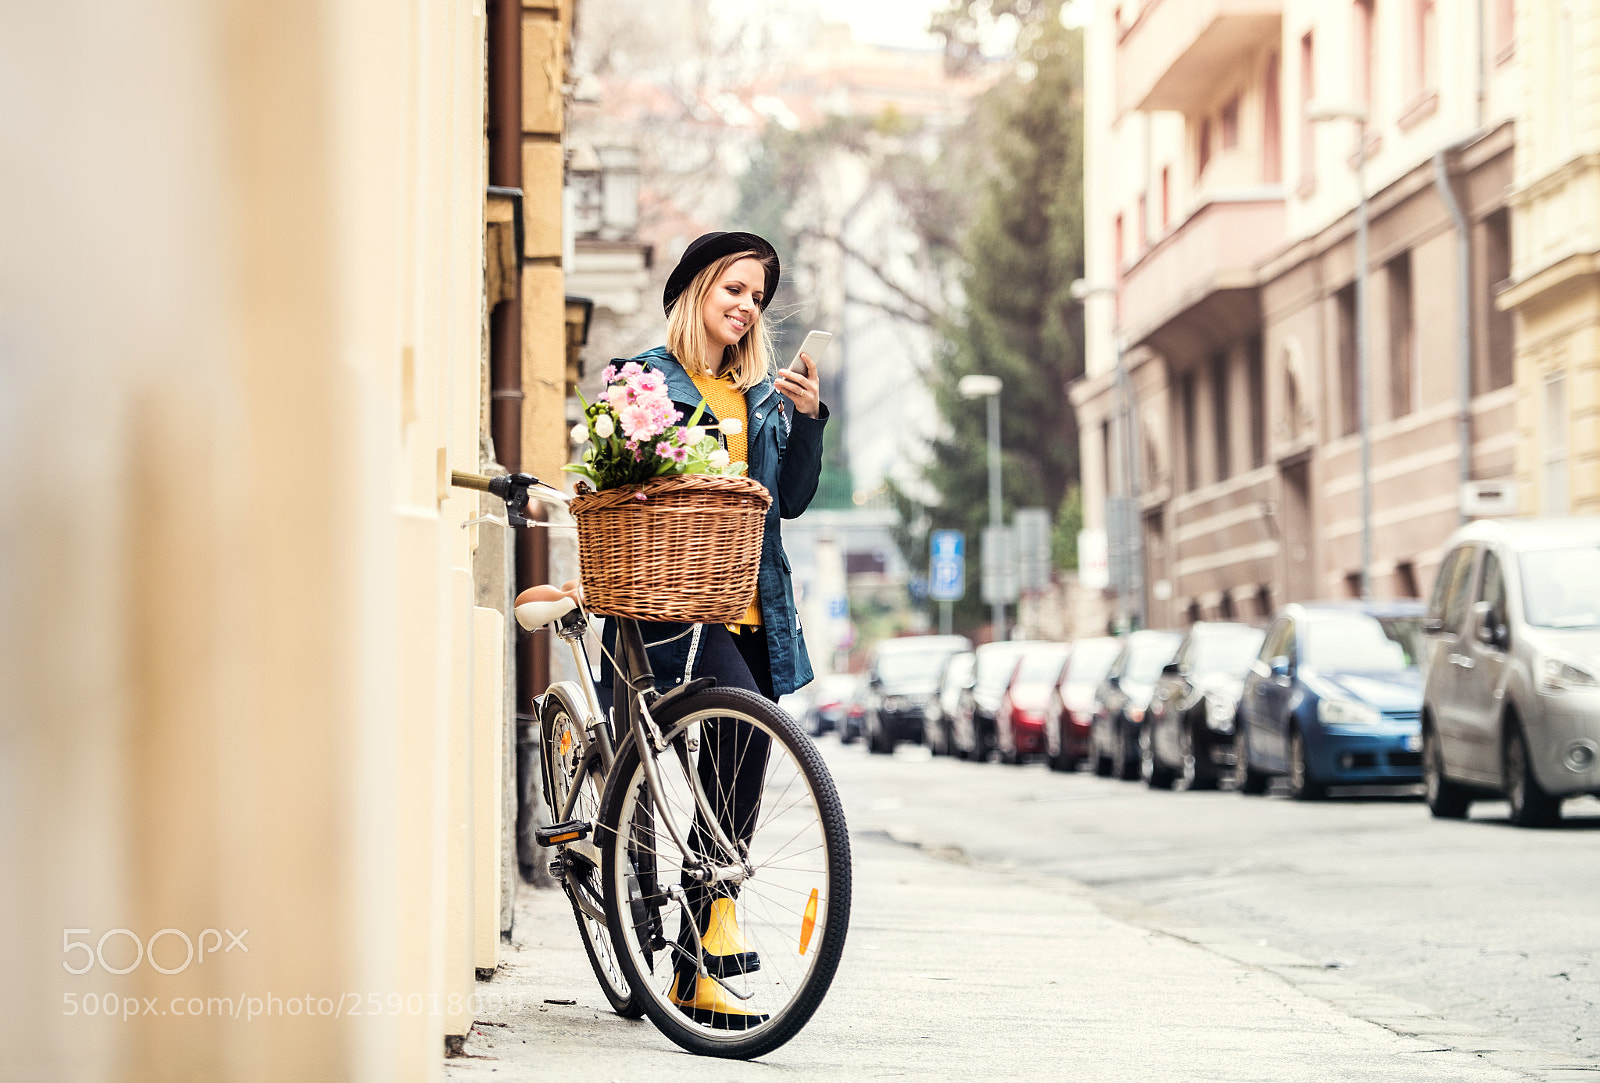 Nikon D5 sample photo. Young woman with bicycle photography